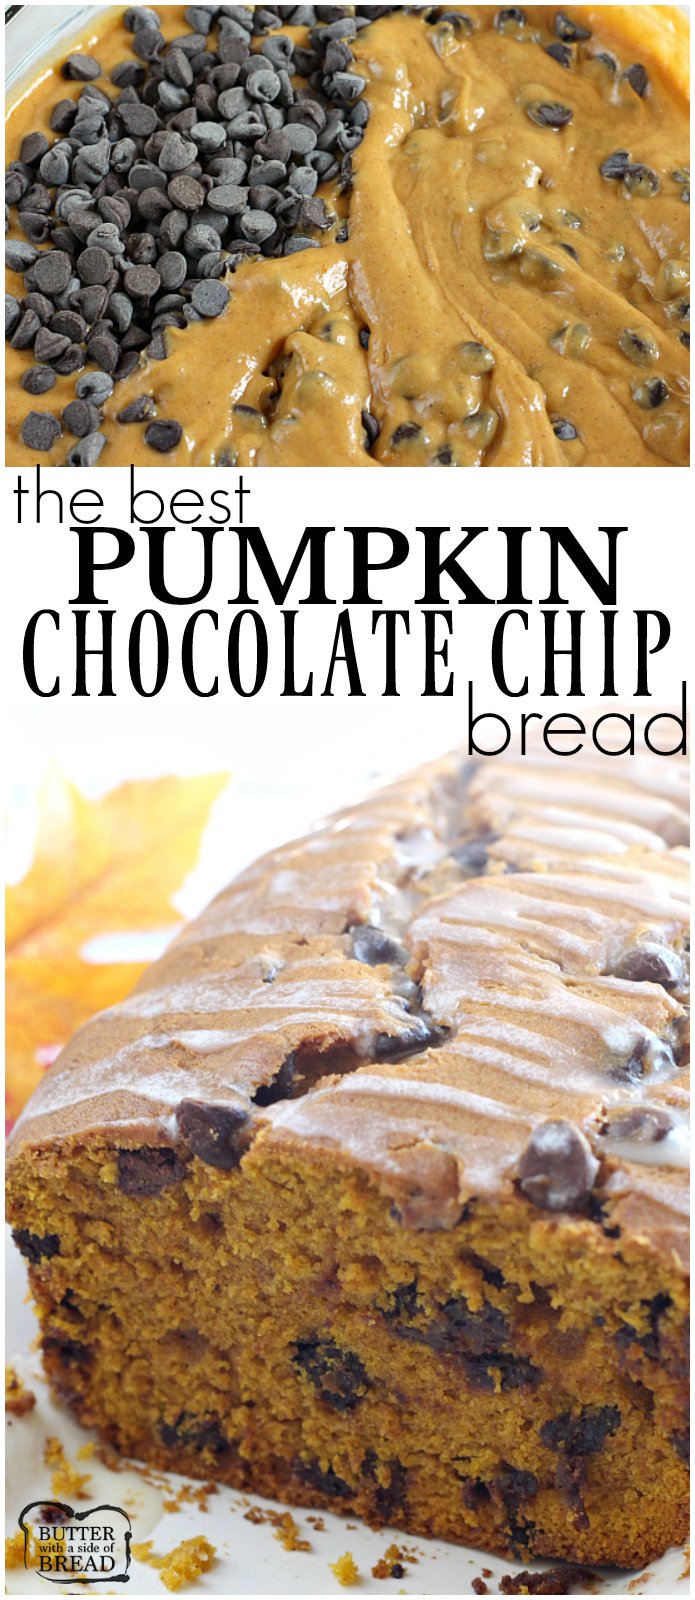 Pumpkin Chocolate Chip Bread is the perfect pumpkin bread recipe!  The vanilla glaze on top is simple and delicious and adds a little bit of extra flavor too! 